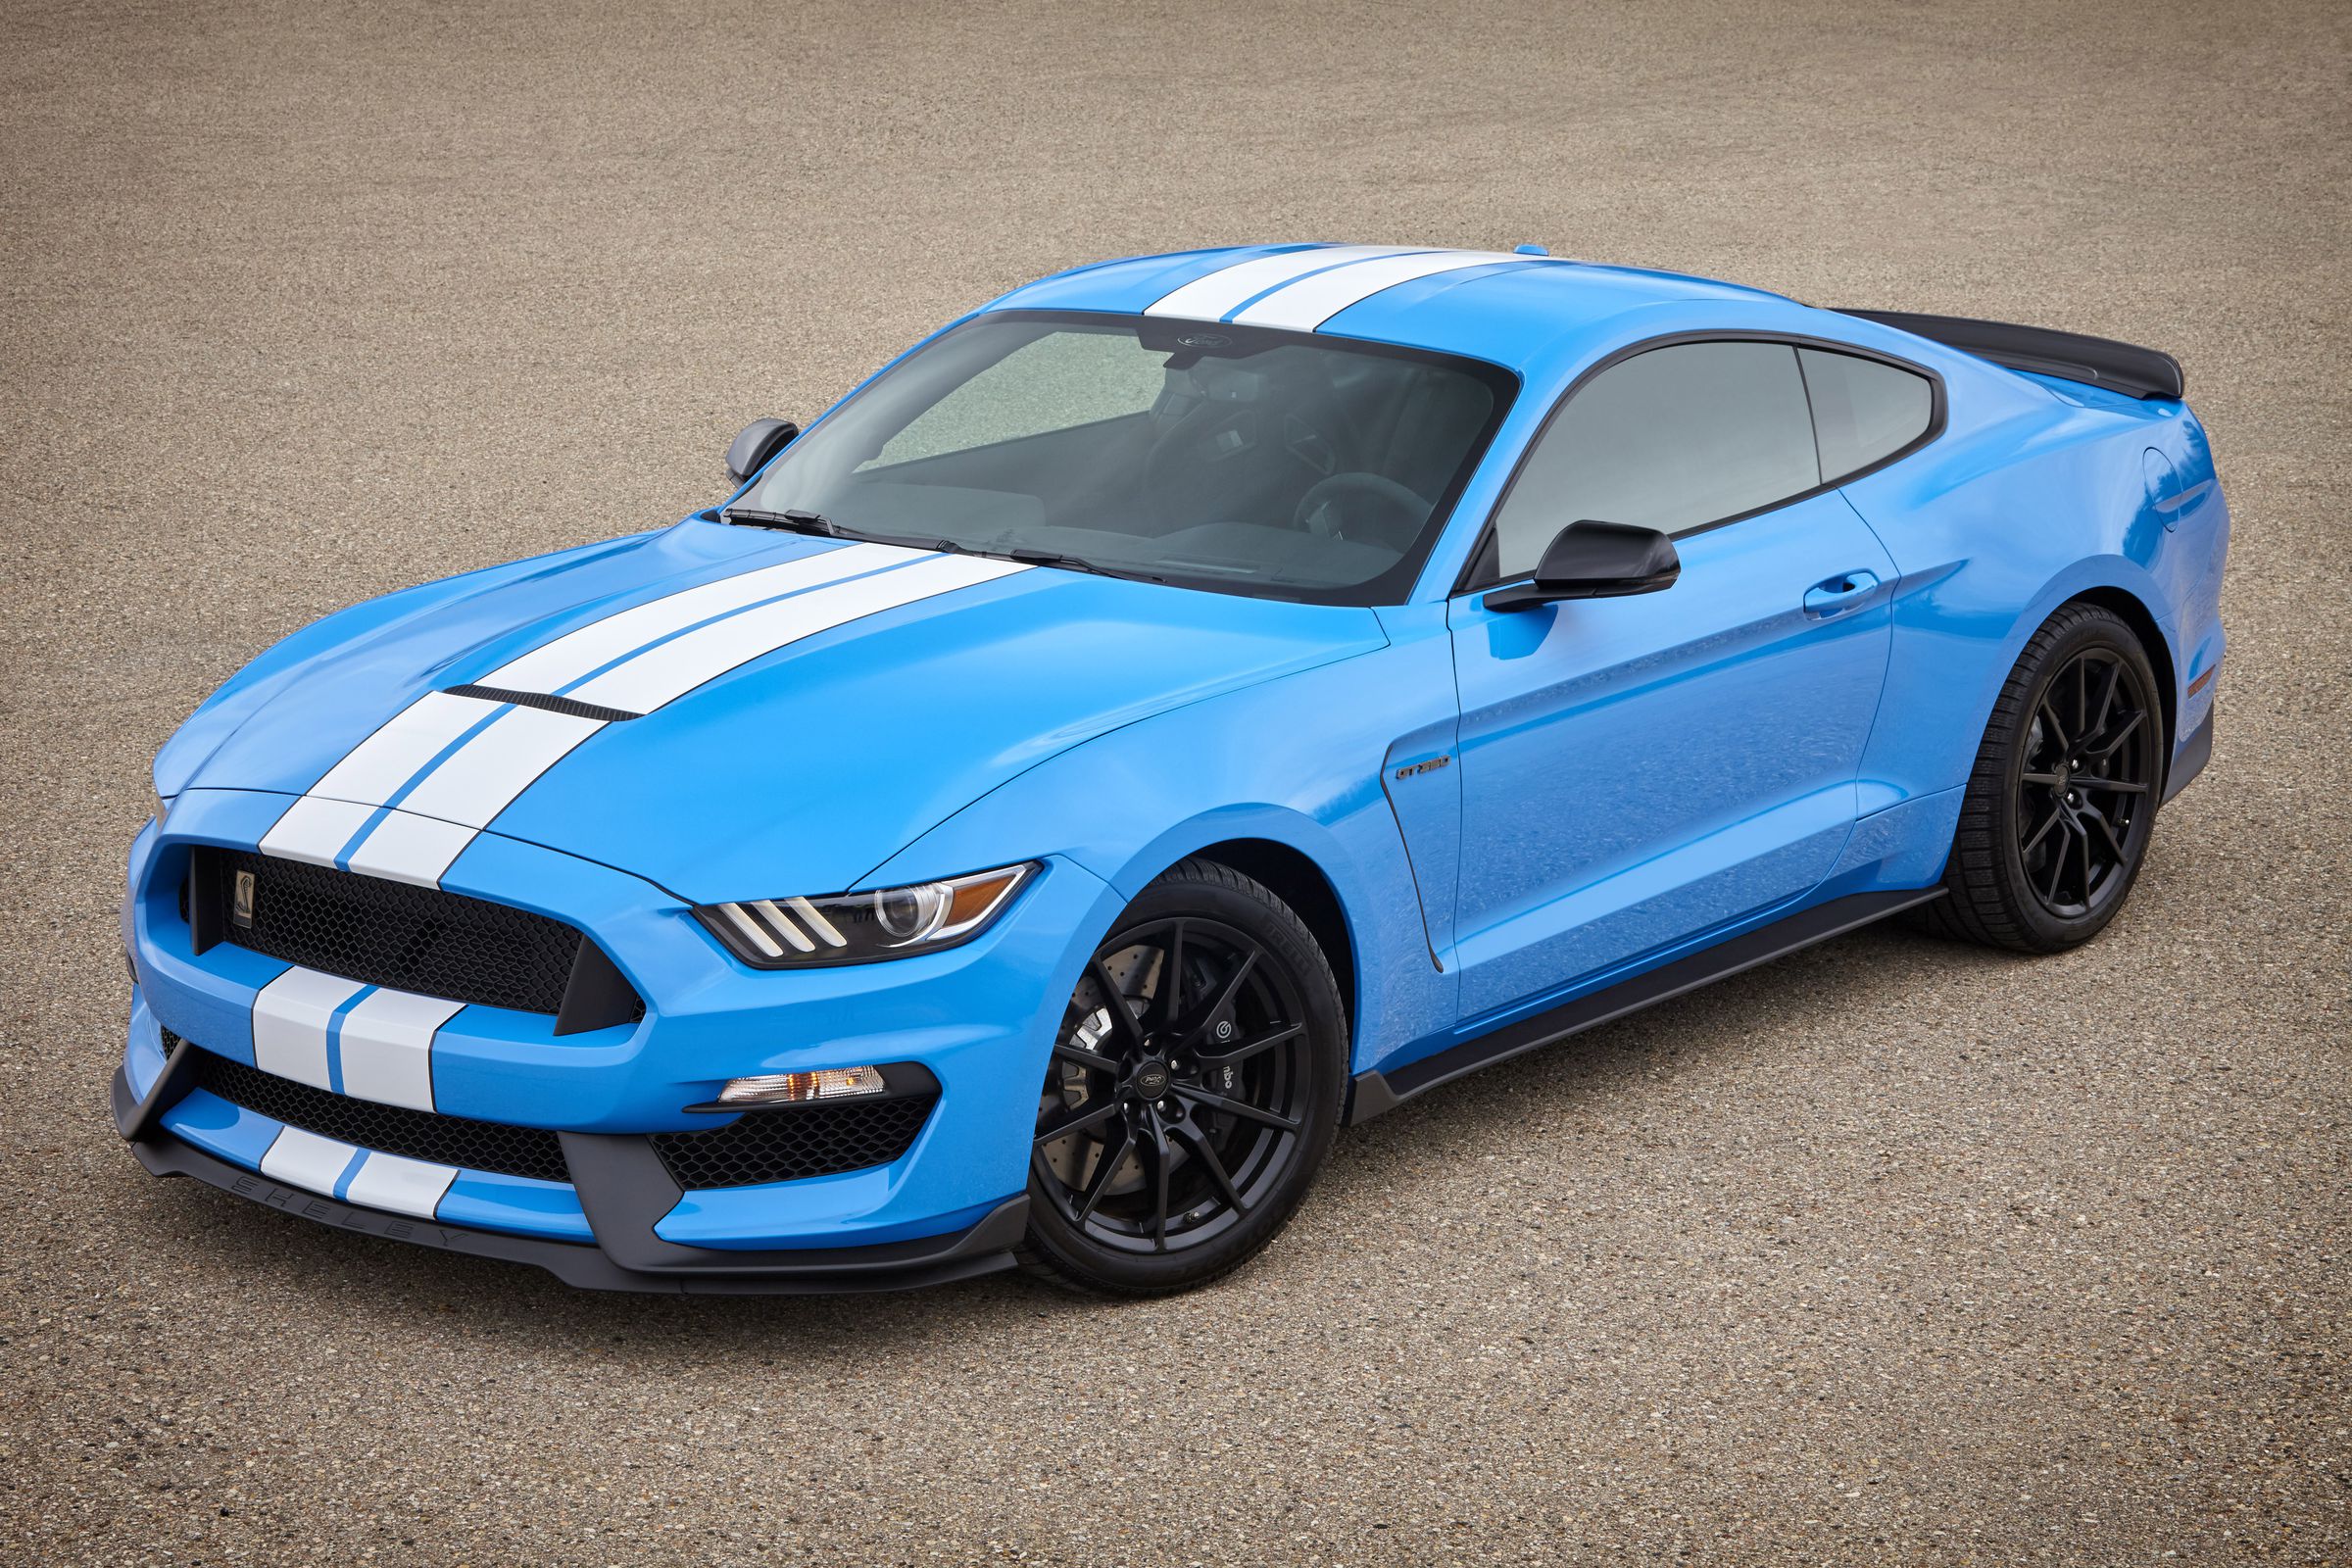 No word if you can lease-share a GT350 for track days.